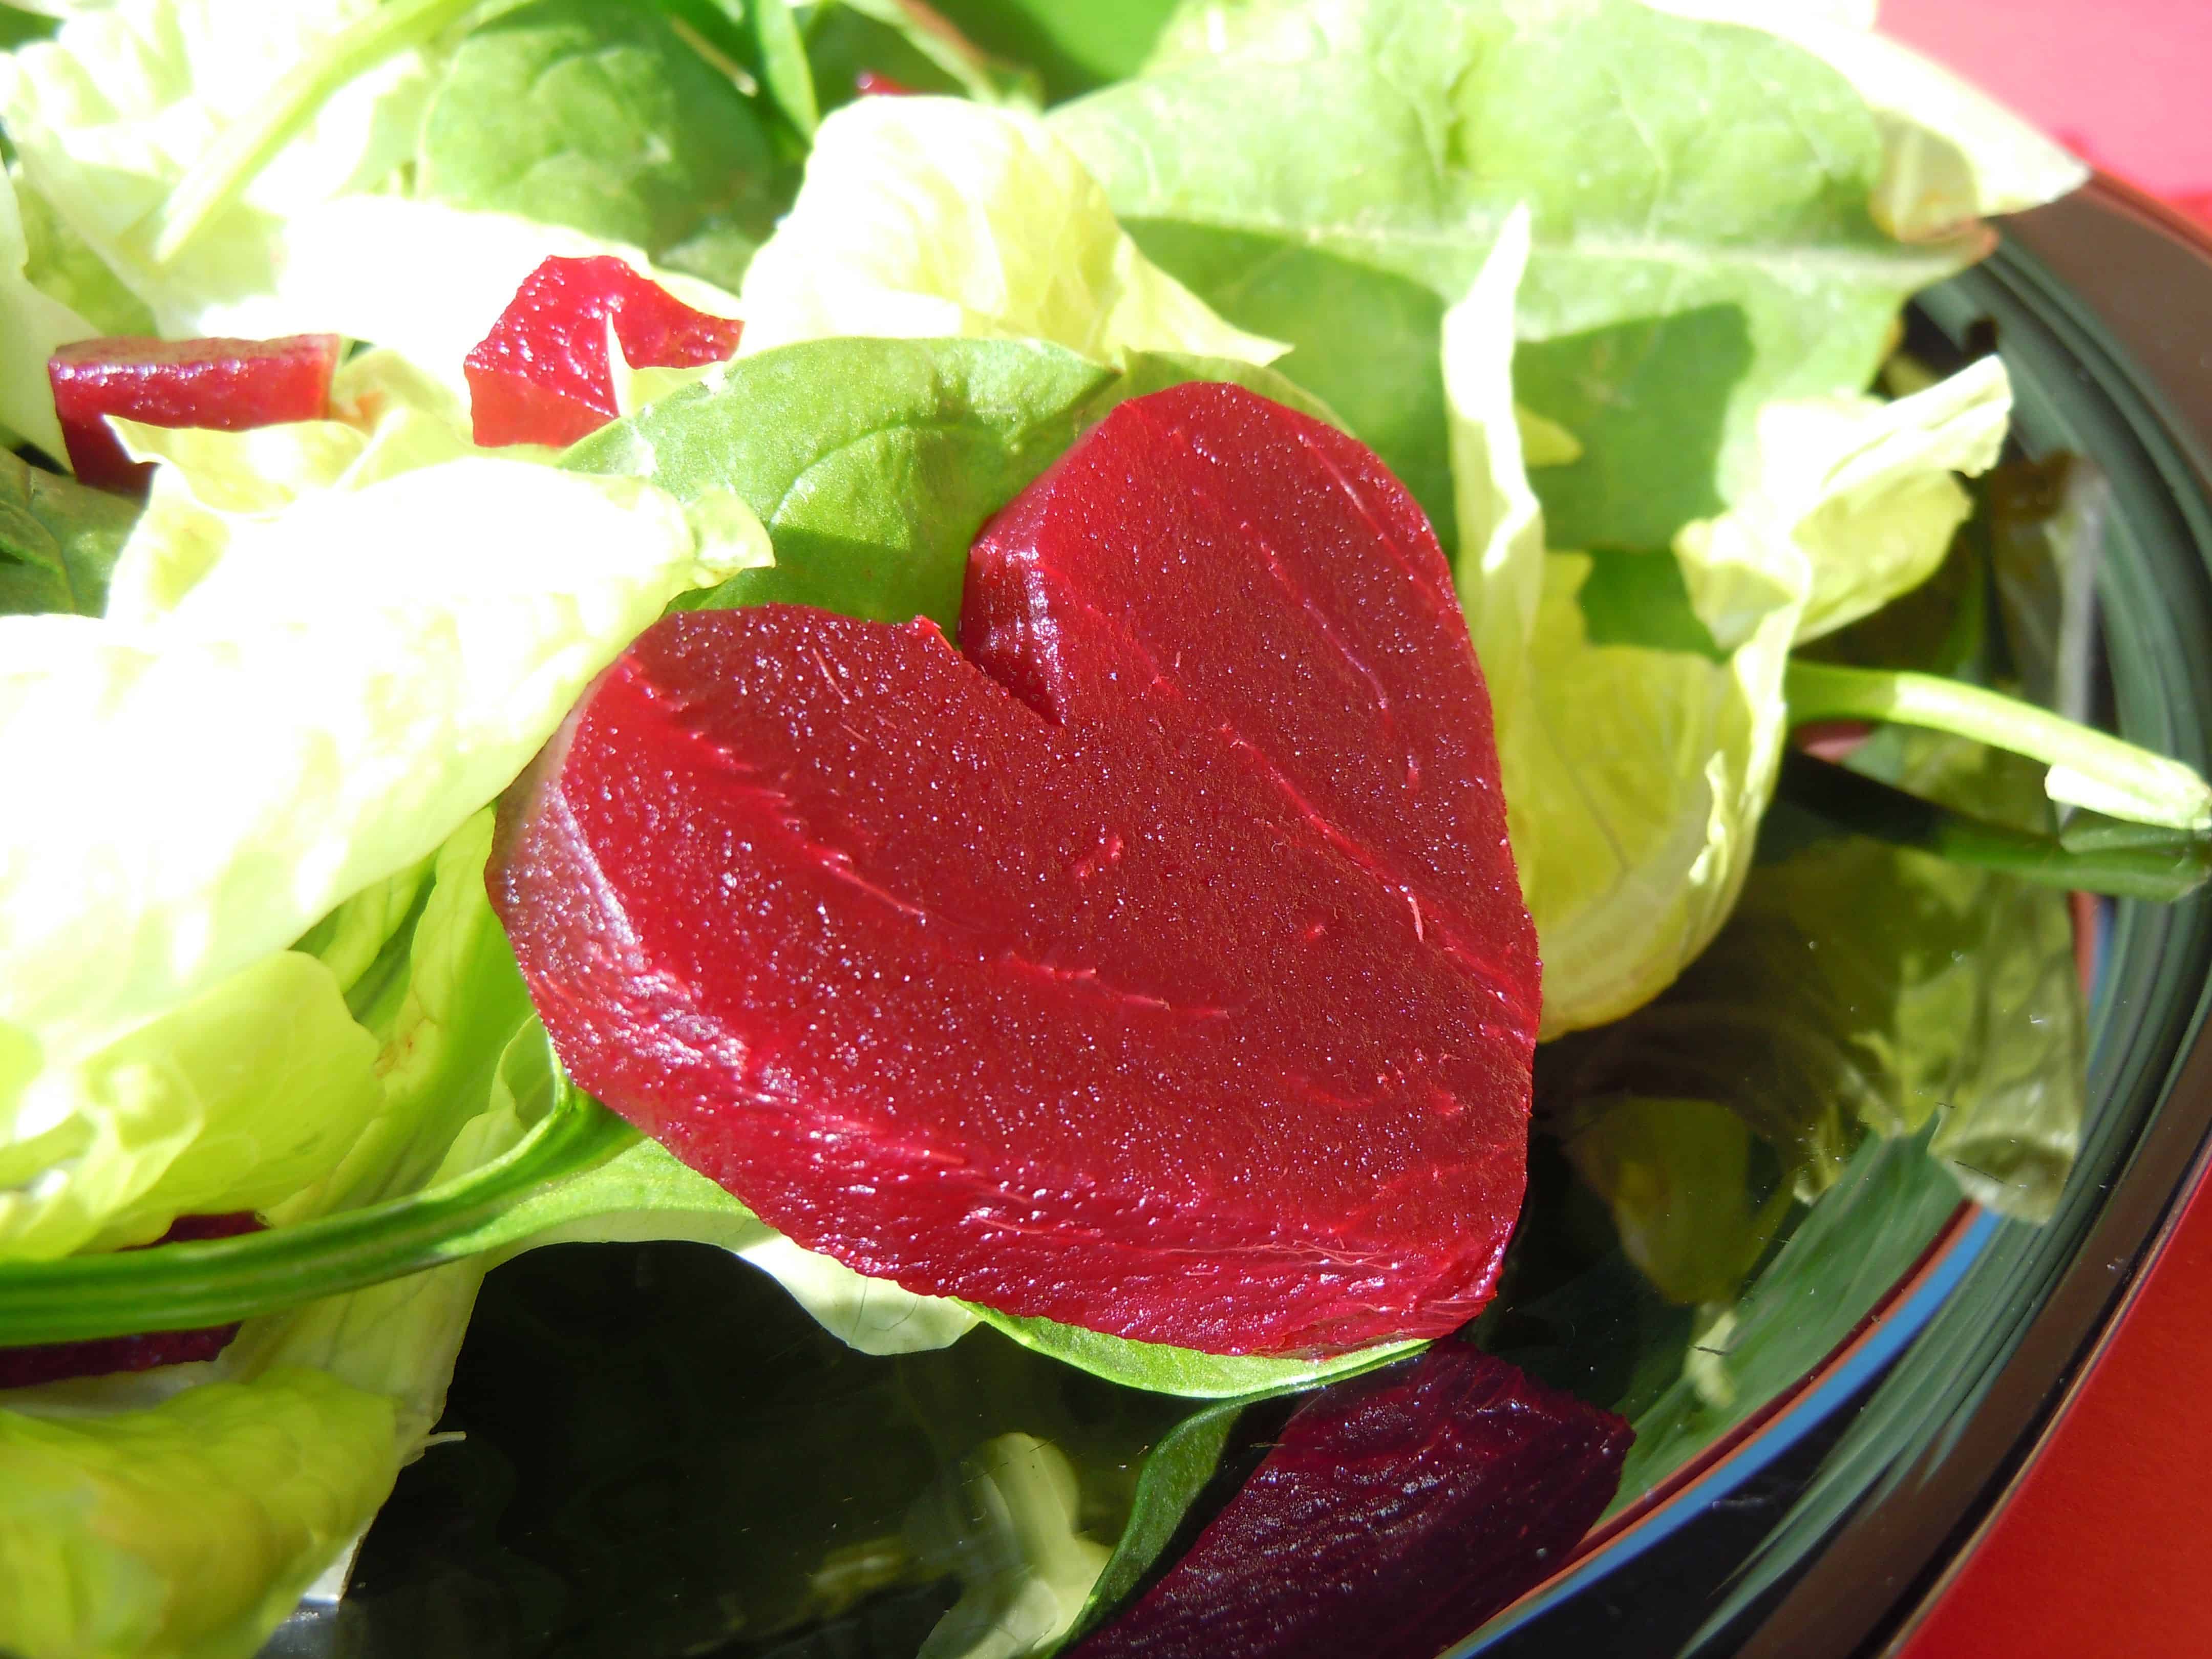 Eating beets can help treat your liver pain and gallbladder pain.